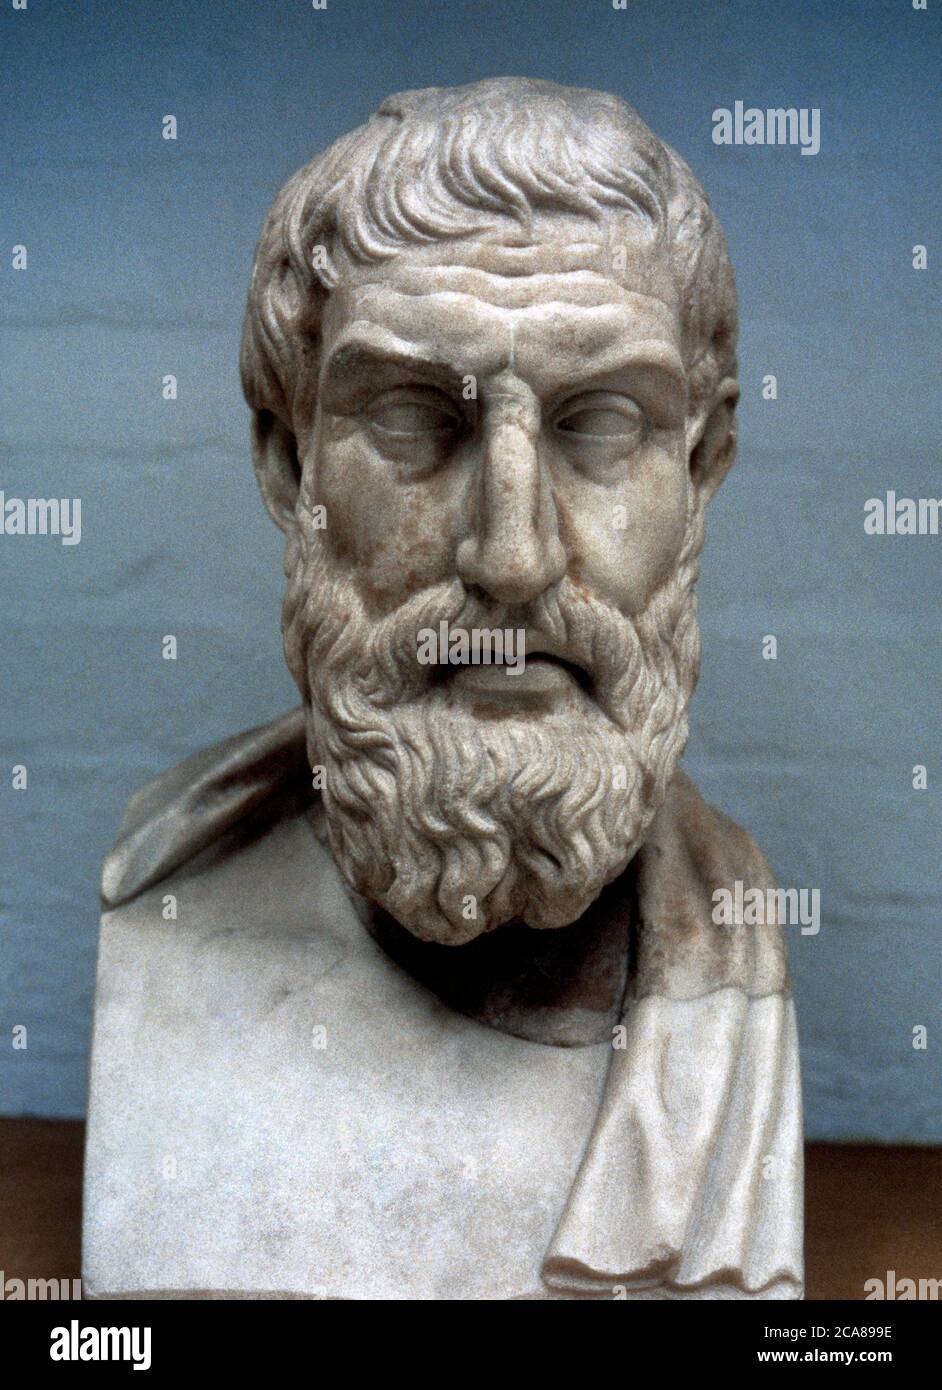 Epicurus (ca.341-270 BC). Ancient Greek philosopher. Bust. Marble. From Villa Casali, Rome (1-160 AD). British Museum. London, England, Great Britain. Stock Photo